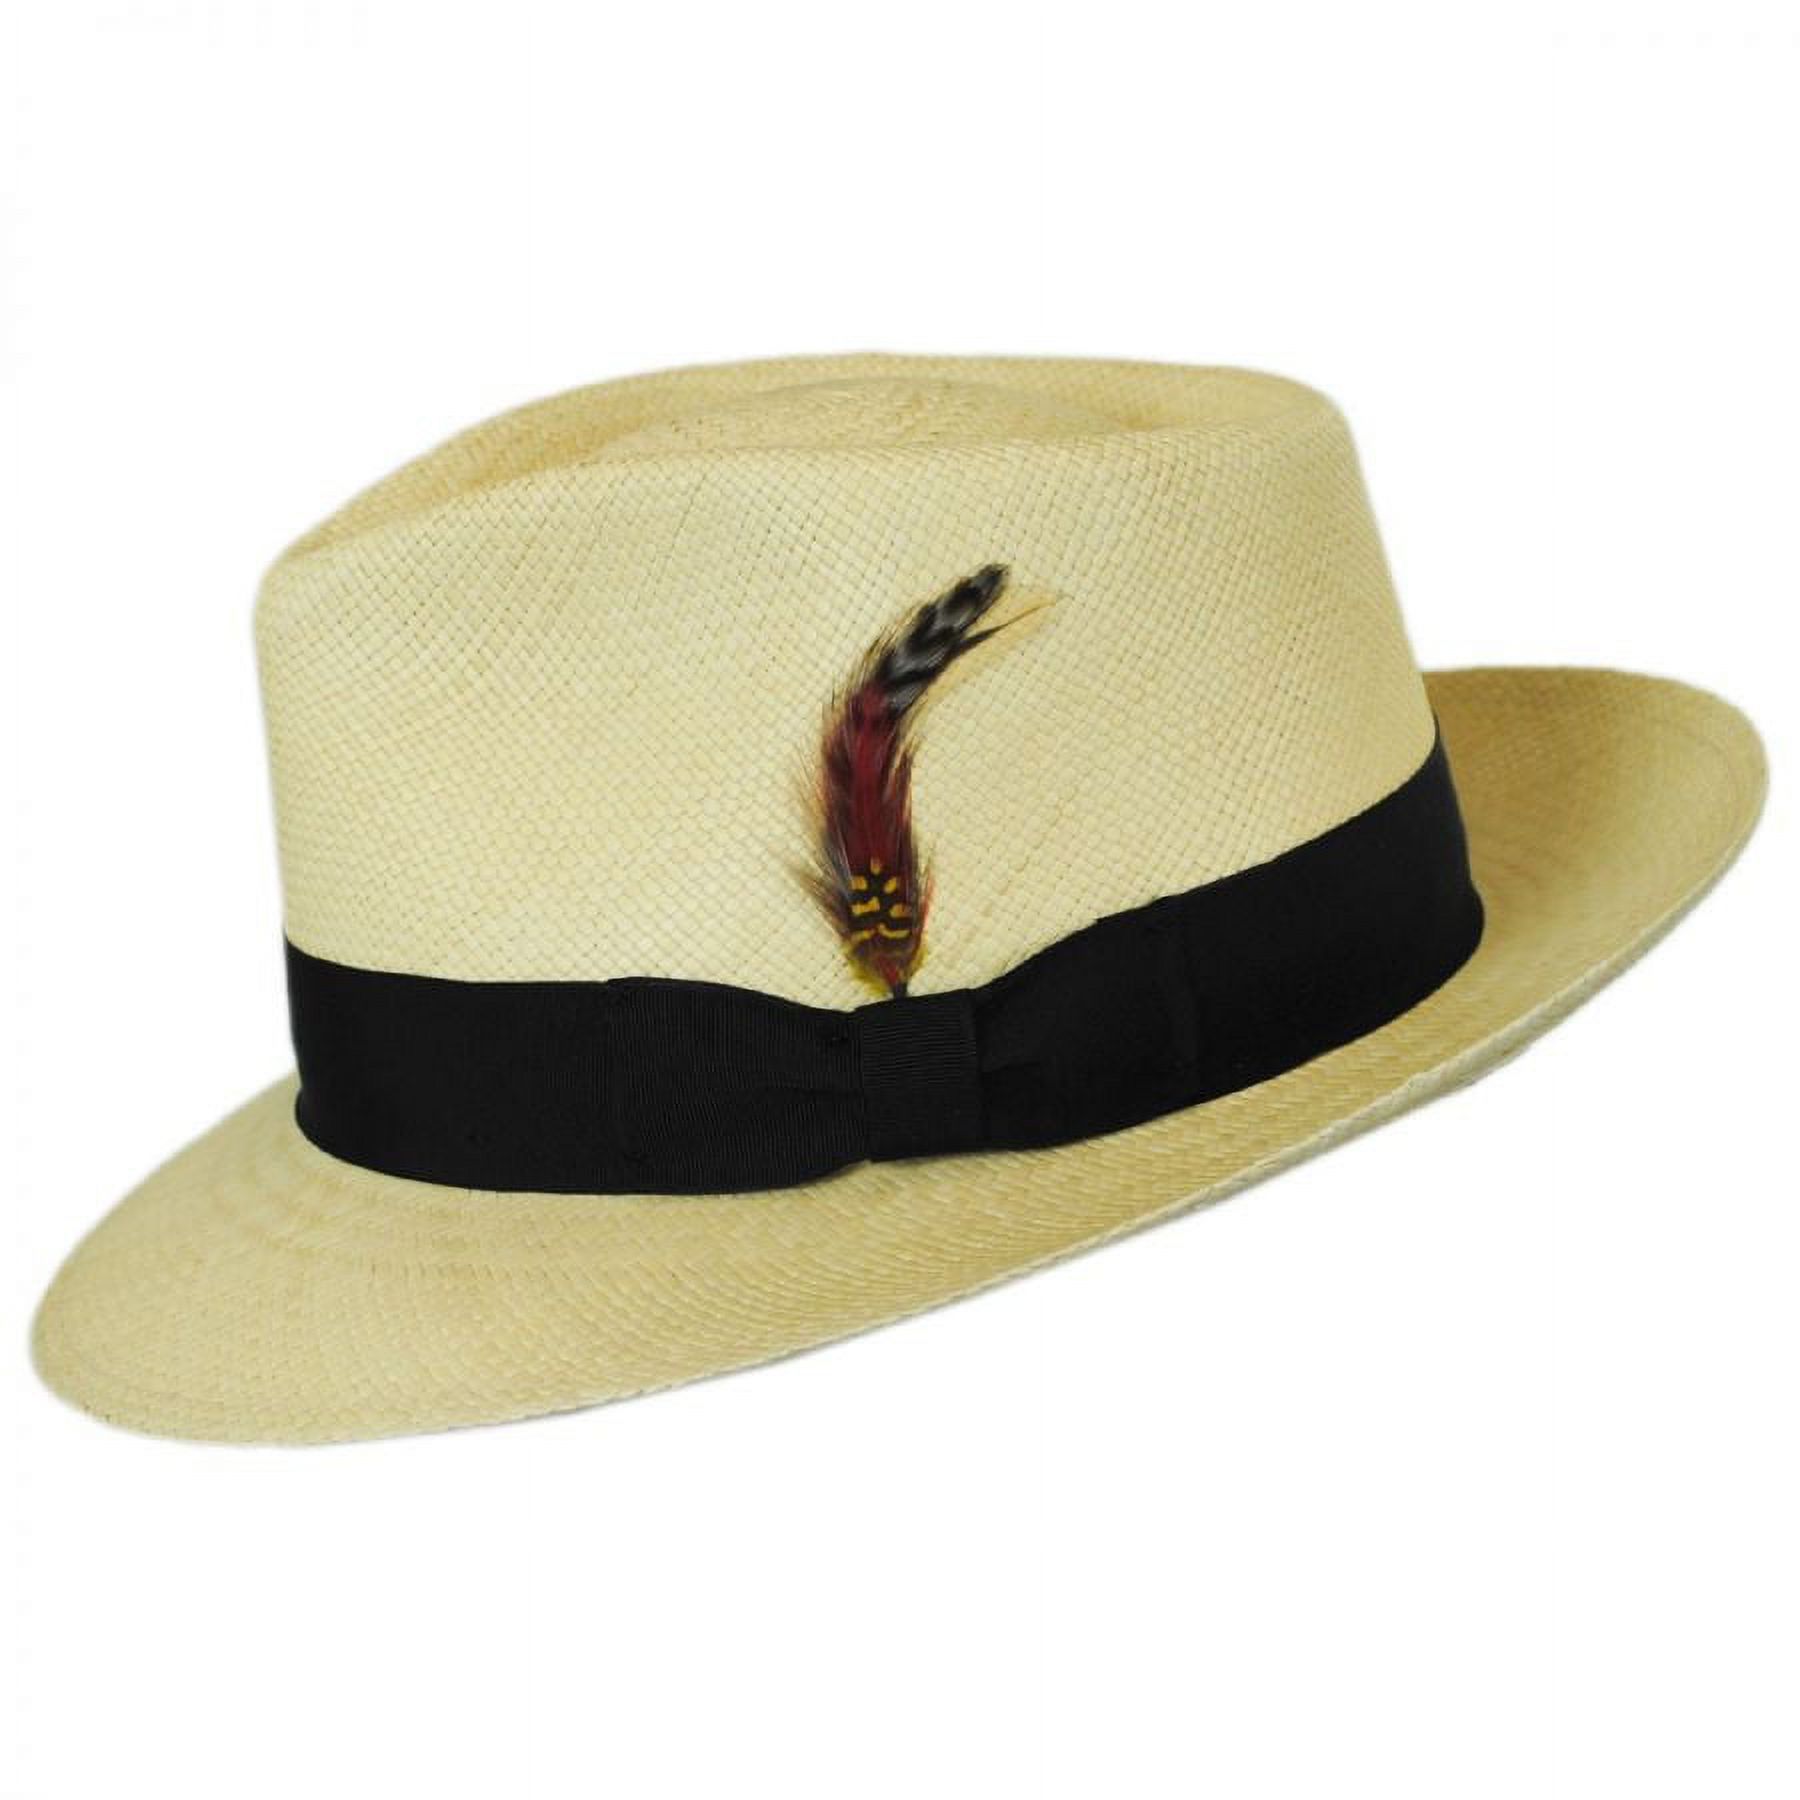 Stain Repellent Panama Straw C-Crown Fedora Hat - XXL - Natural - image 3 of 4